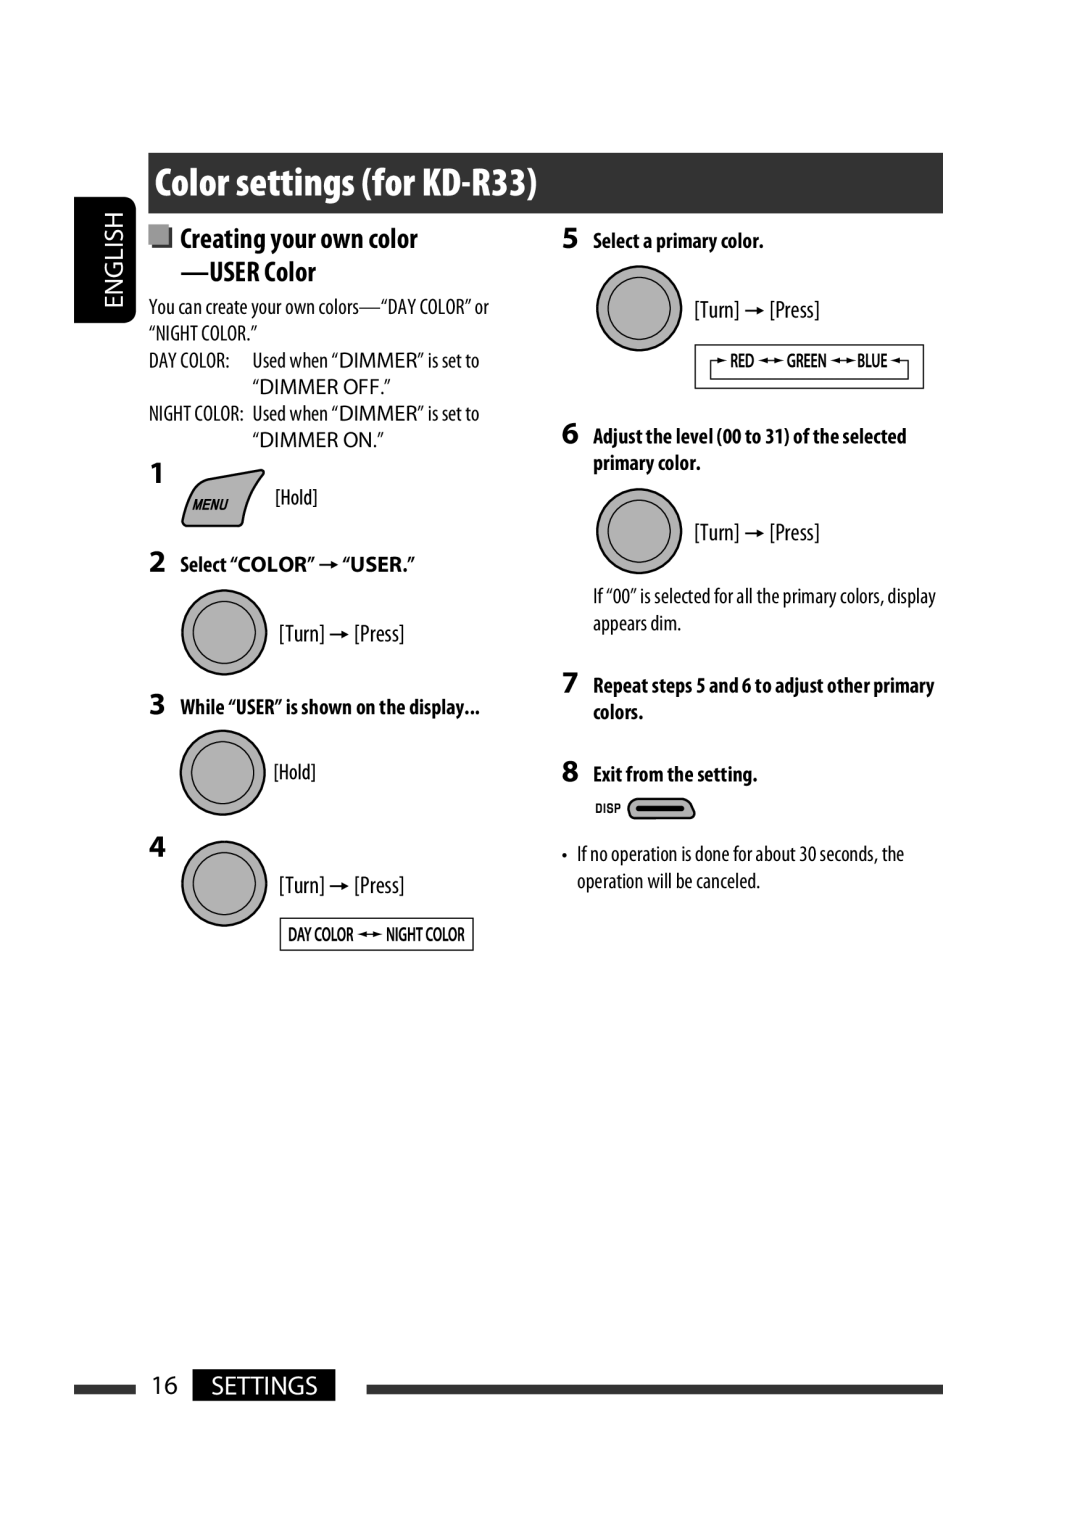 JVC KD-R302, KD-R303 manual Color settings for KD-R33, Settings, Creating your own color -USER Color, English, Turn =Press 